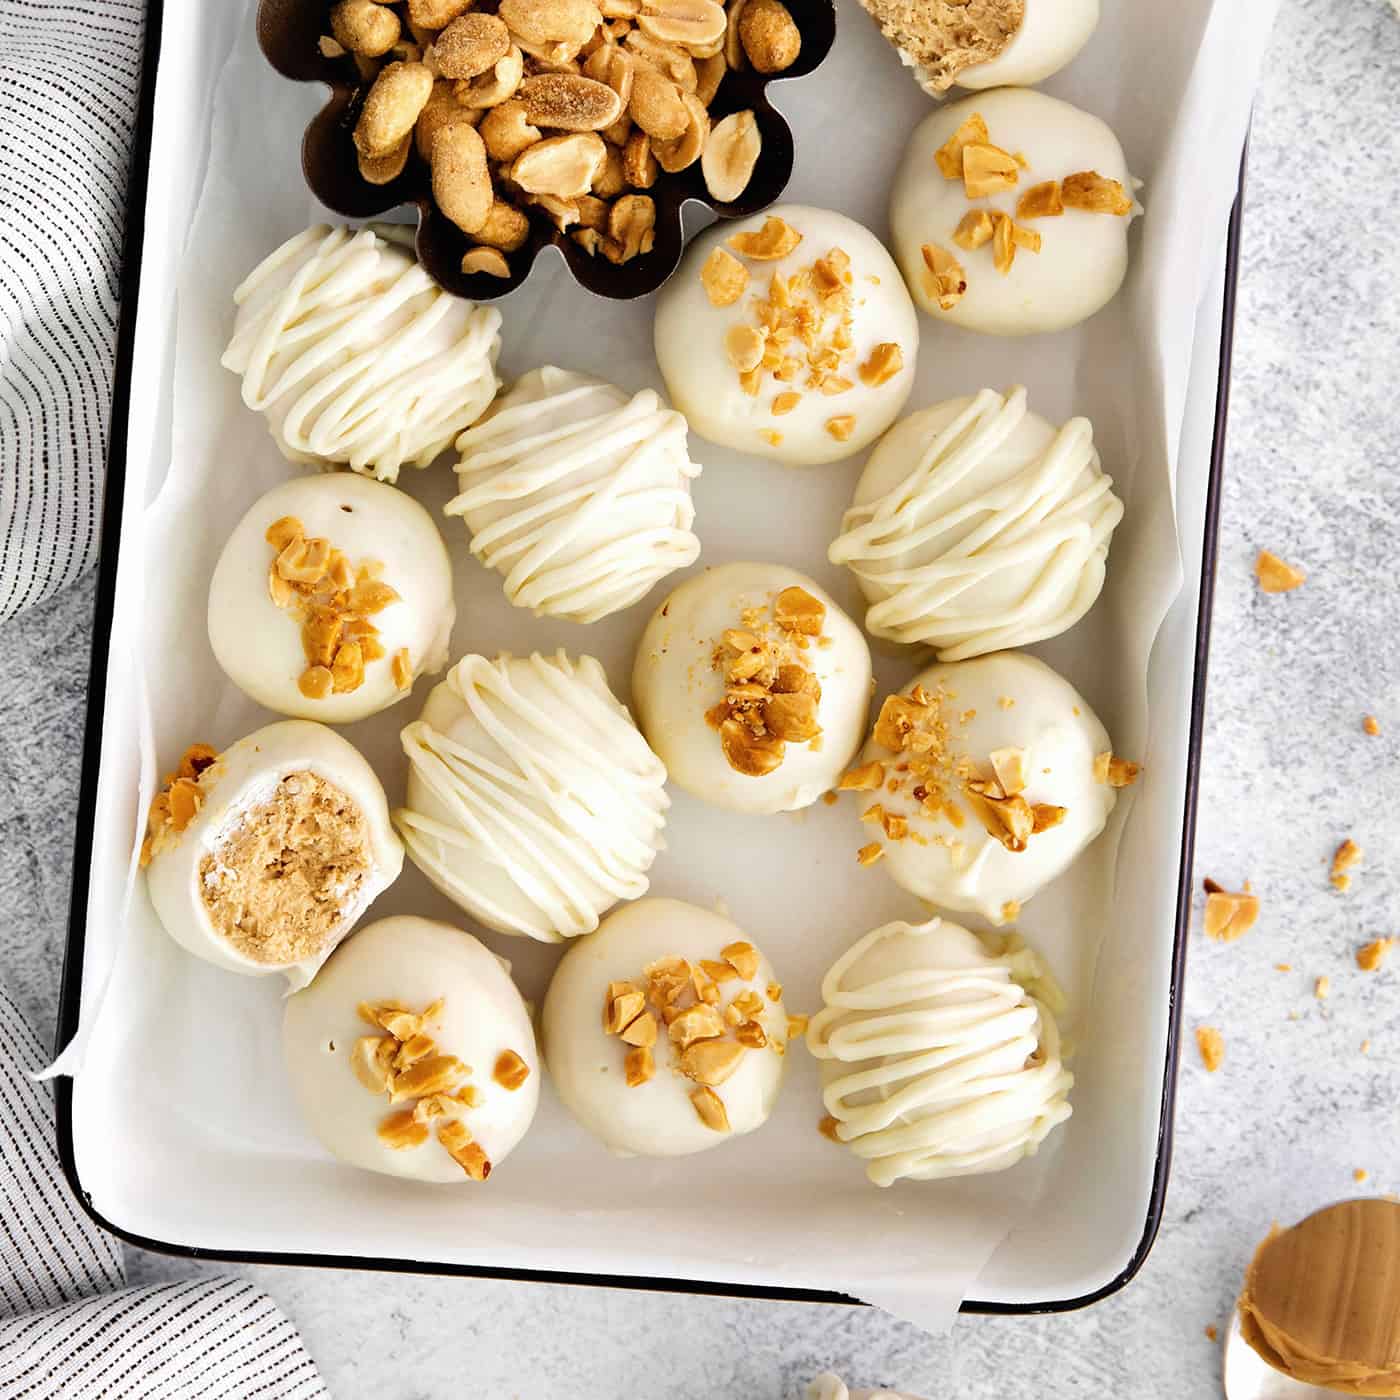 Overhead view of white chocolate peanut butter balls